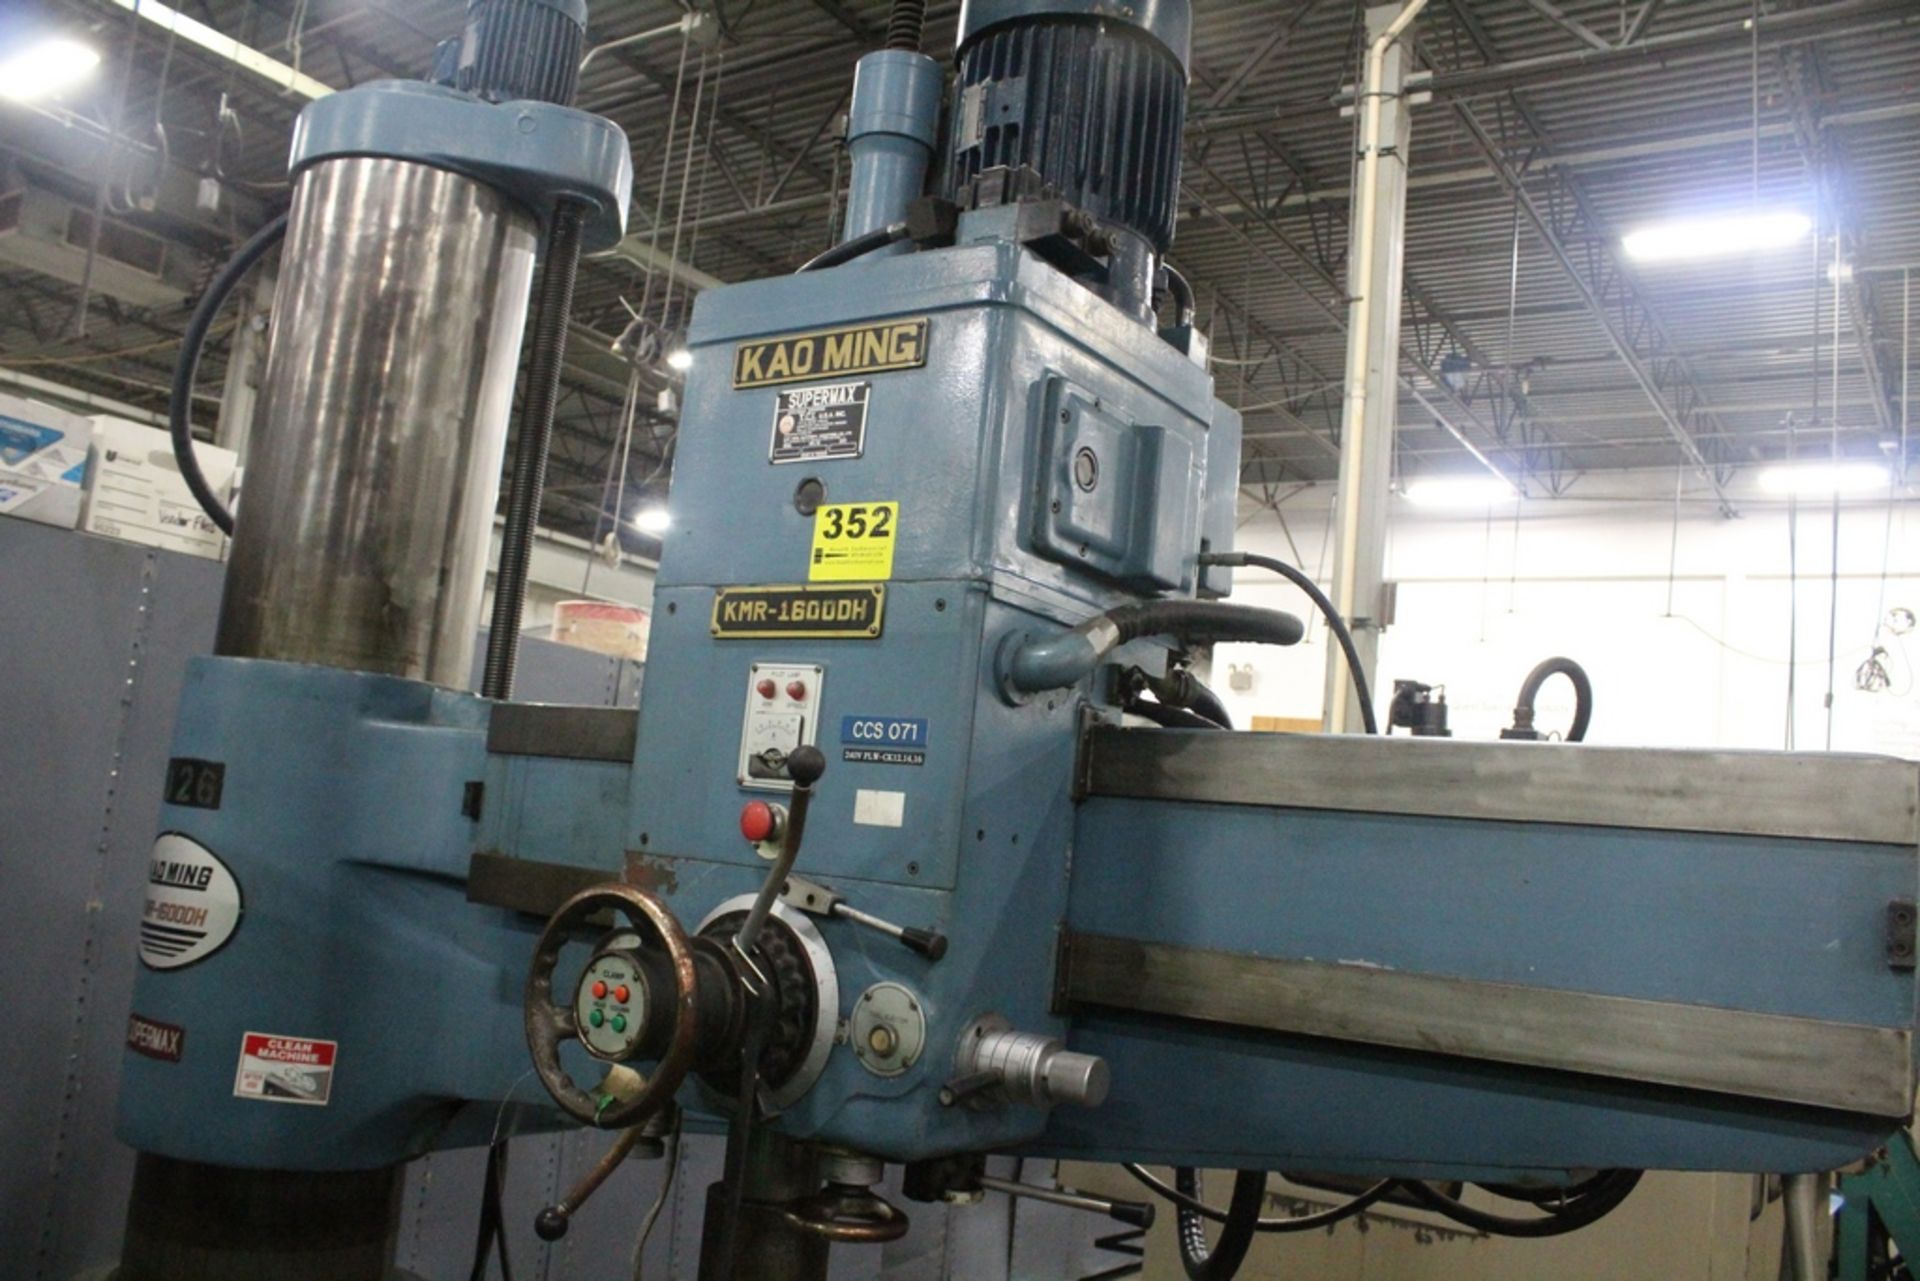 KAO MING MODEL KMR-1600DH SUPERMAX RADIAL ARM DRILL, 5' X 16" COLUMN, S/N 1888 (SHIPPING WEIGHT 10, - Image 2 of 6